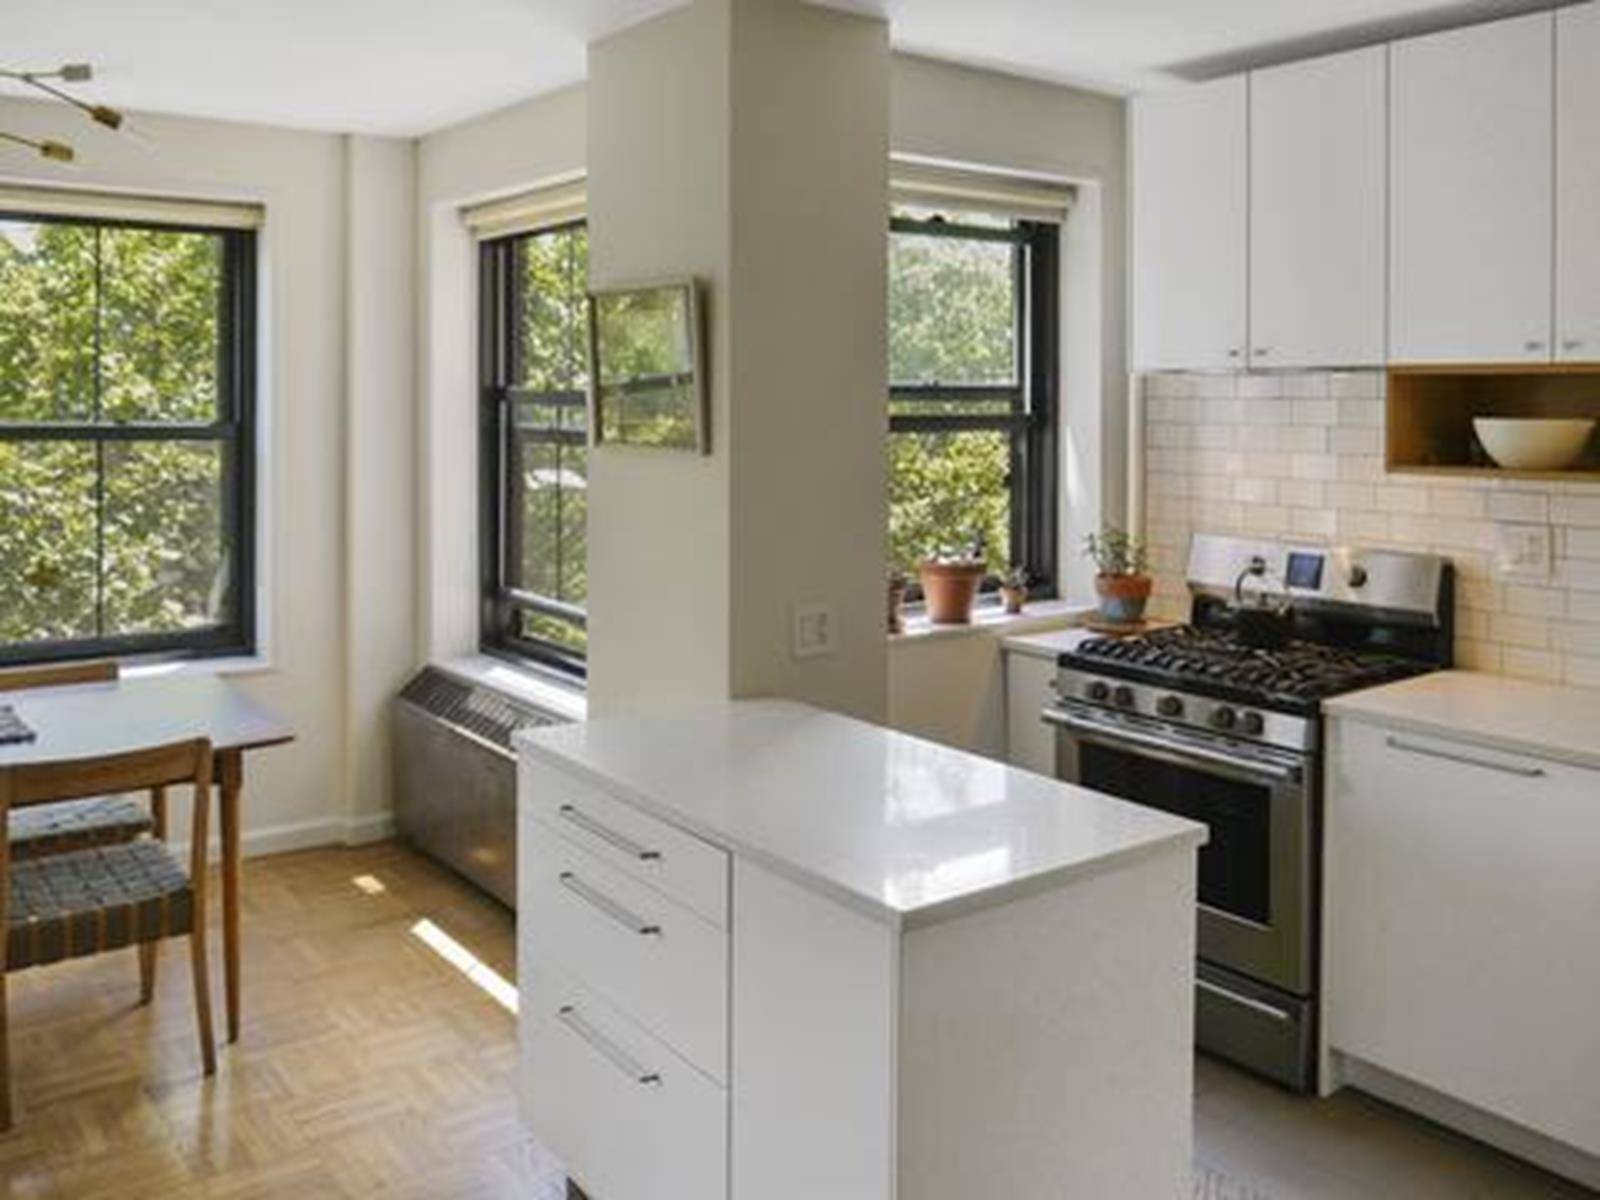 1BR Clinton Hill Coop For SaleThis spacious, convertible one bedroom co op in Clinton Hill has been thoughtfully re designed to include numerous updates that create a contemporary feel while ...